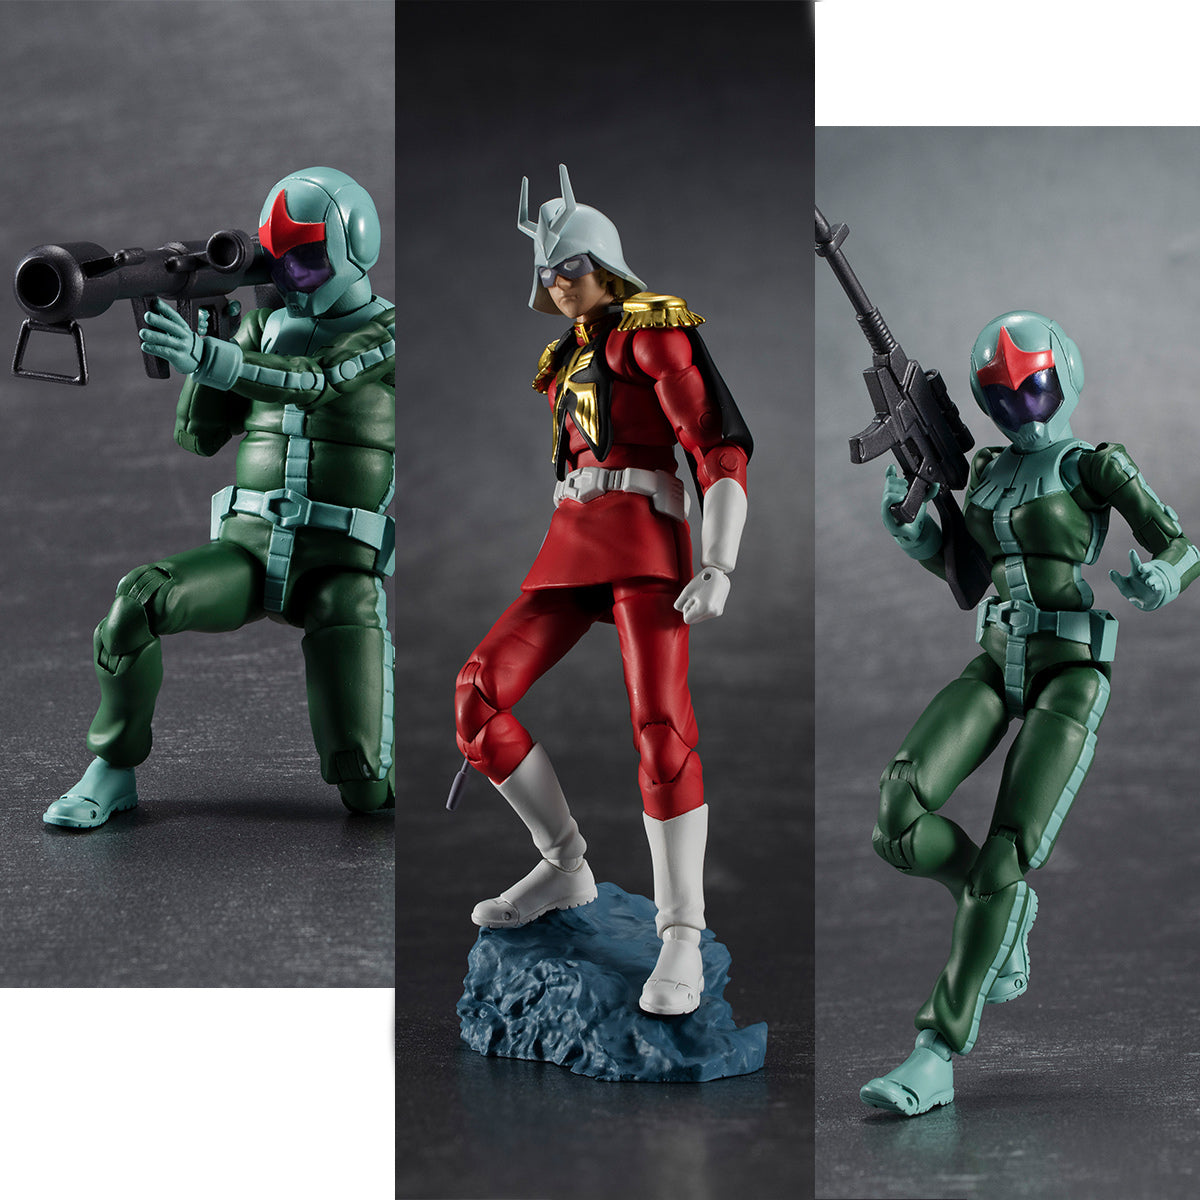 GUNDAM - G.M.G. PRINCIPALITY OF ZEON ARMY SOLDIER 04-06 NORMAL SUIT SOLDIER & CHAR AZNABLE SET [WITH GIFT]